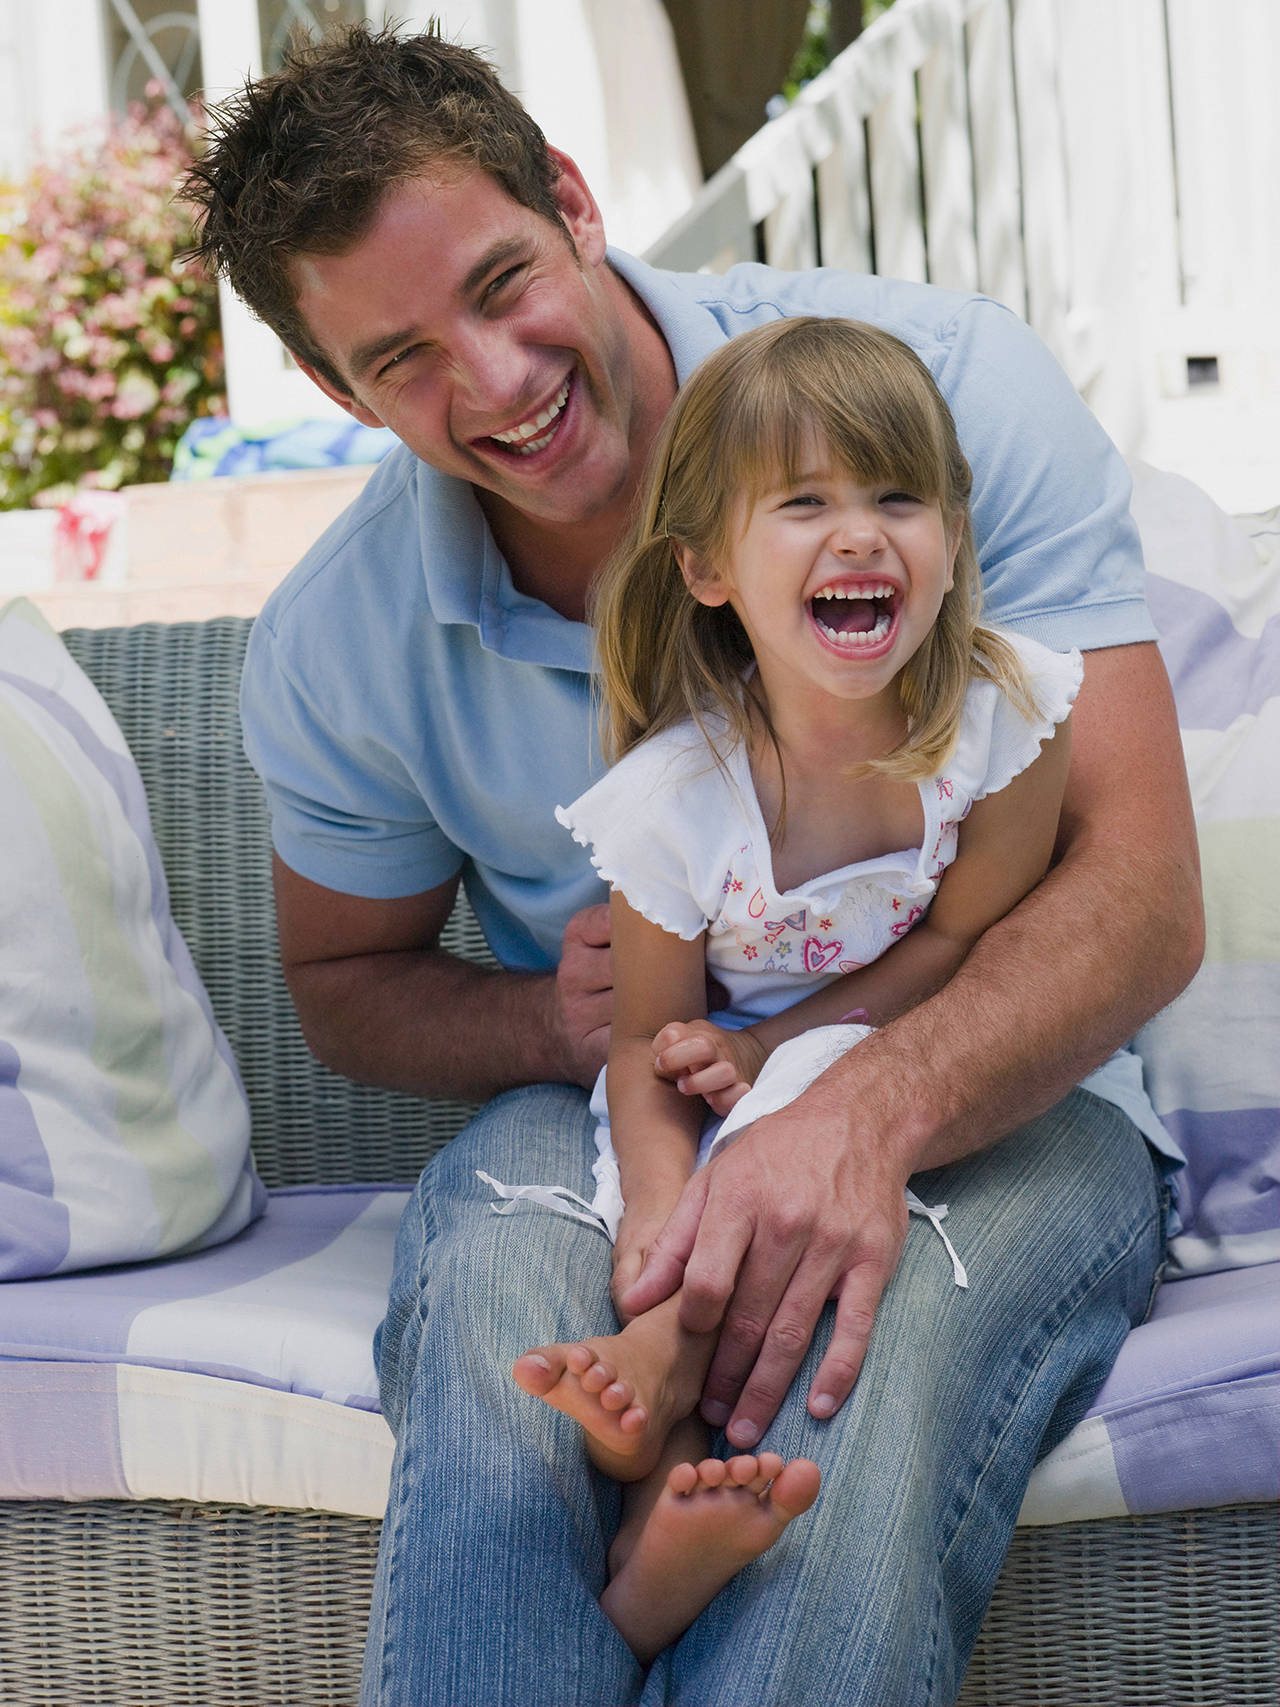 A new study finds differences in how fathers react to daughters and sons.(Dreamstime | TNS)